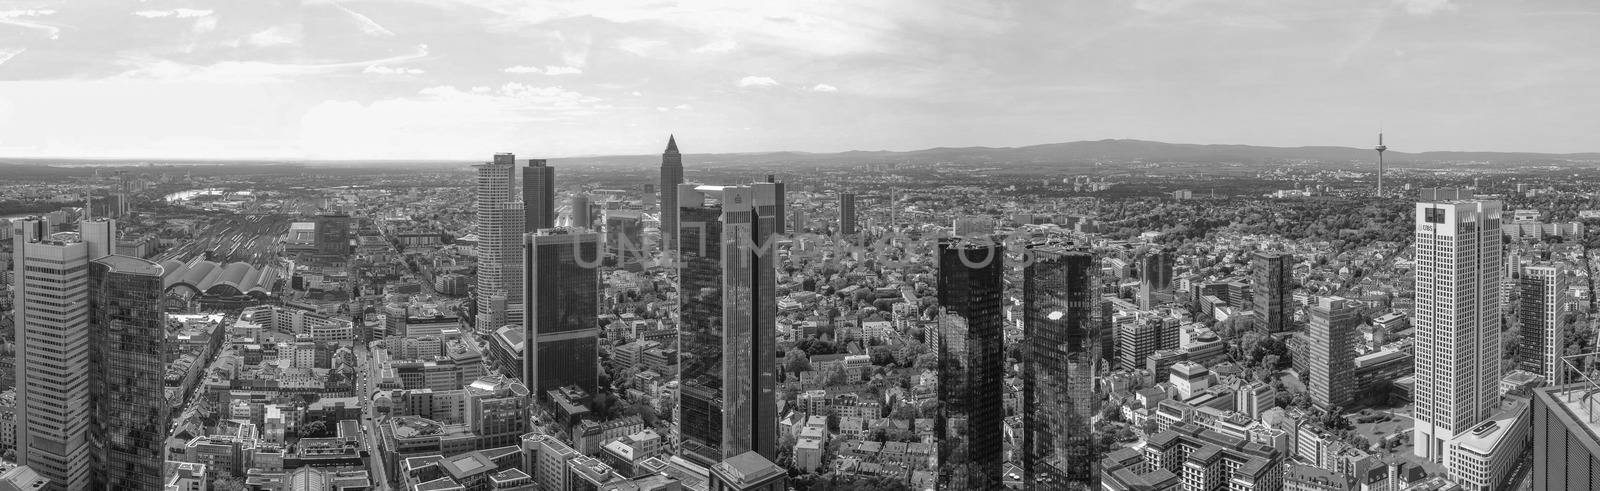 FRANKFURT AM MAIN, GERMANY - JUNE 3, 2013: Aerial view of the city centre with the largest business district in Europe - in black and white